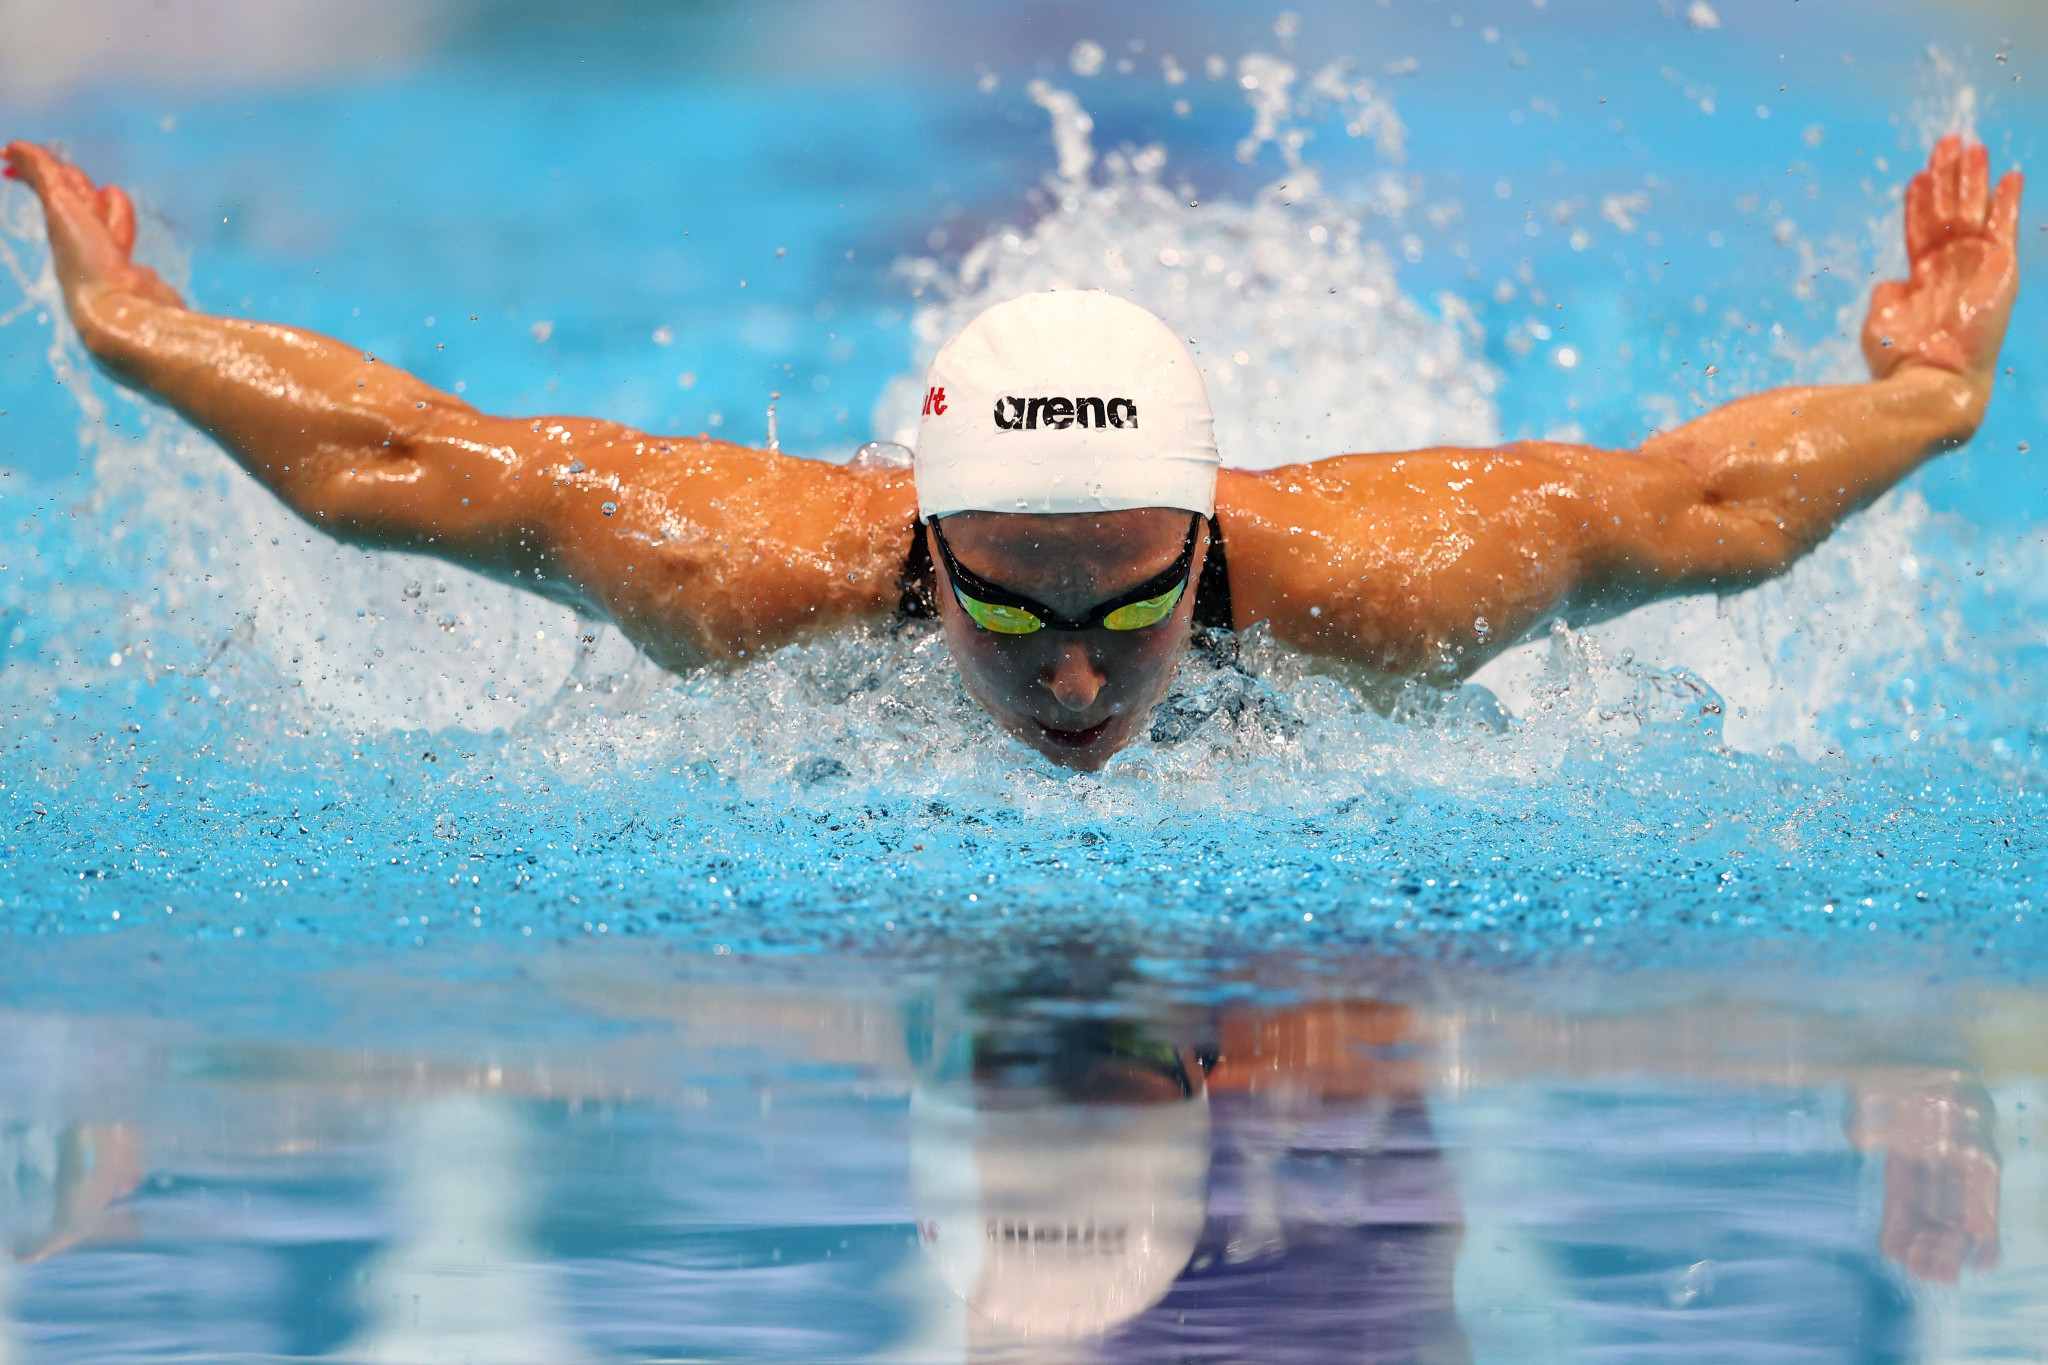 Swiss swimmer Maria Ugolkova impressed in the women's 100m individual medley semi-finals ©Getty Images